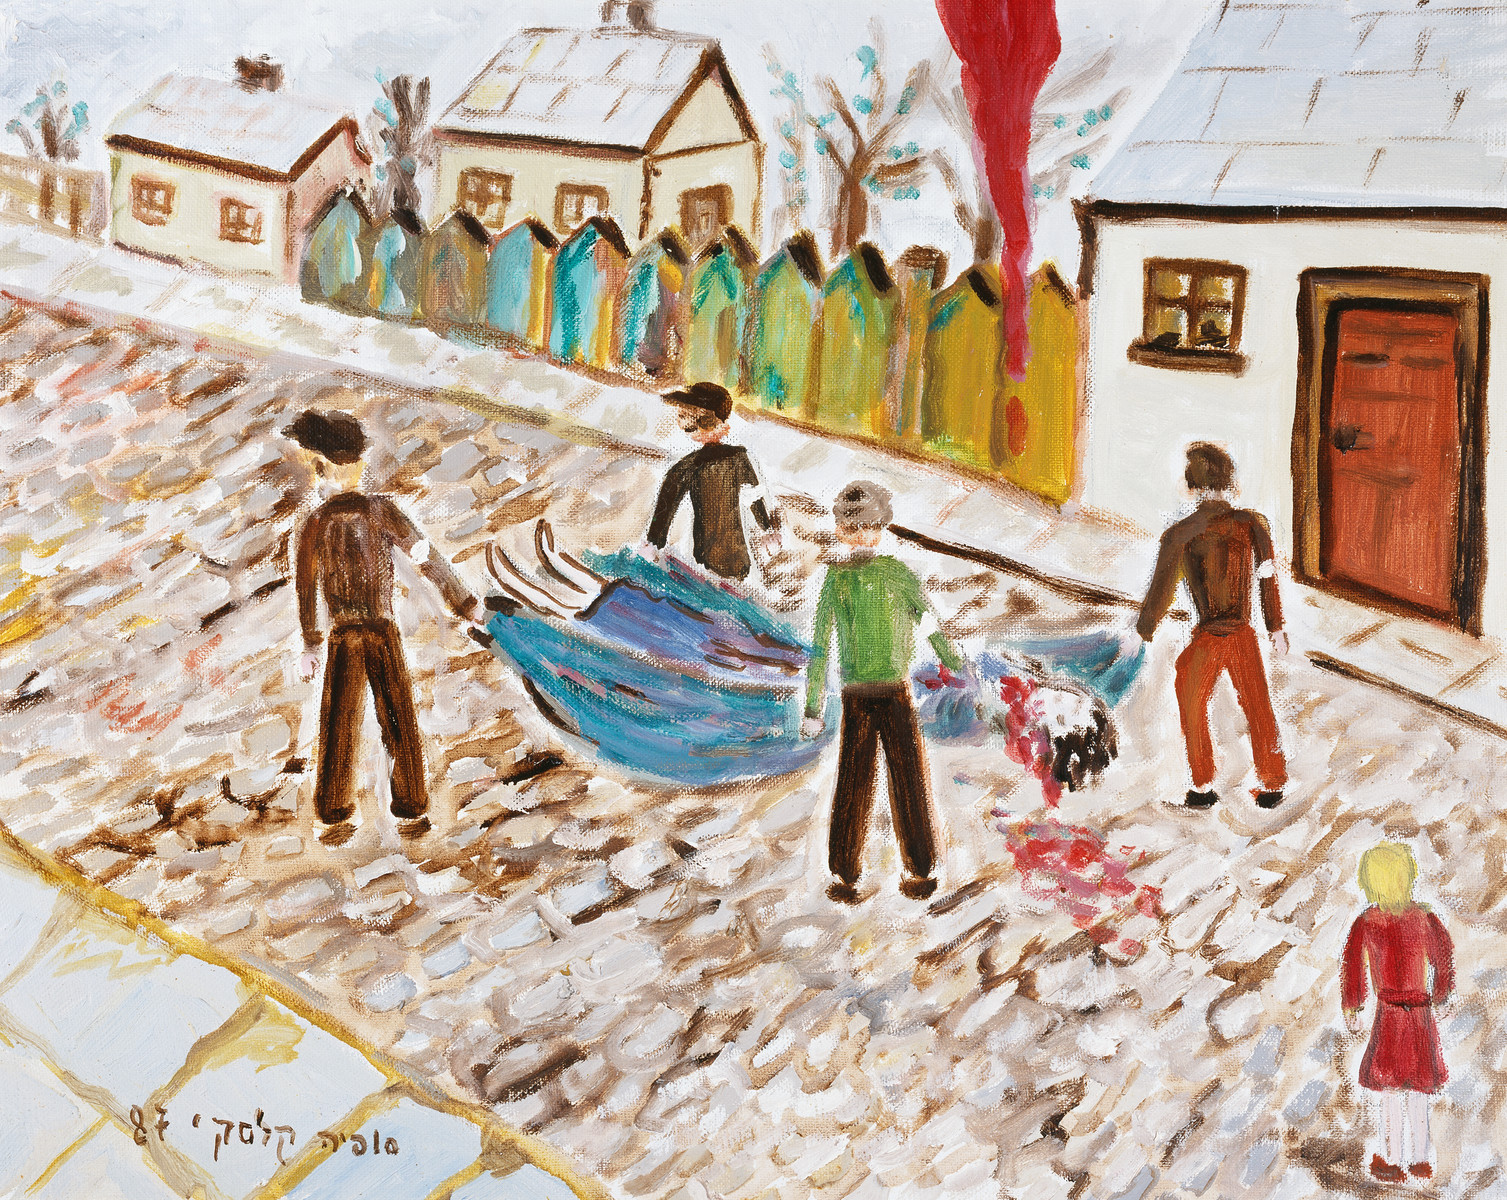 A painting by artist Sophia Kalski entitled "Murder in the Street." 

The artist writes about the image, "In Trembowla ghetto, in the spring of 1943. A woman walked in the ghetto and all of a sudden, a German murdered her for no reason. Hearing the screaming, I walked out and I saw four policeman removing her wrapped in a blanket and drops of blood falling on the road."